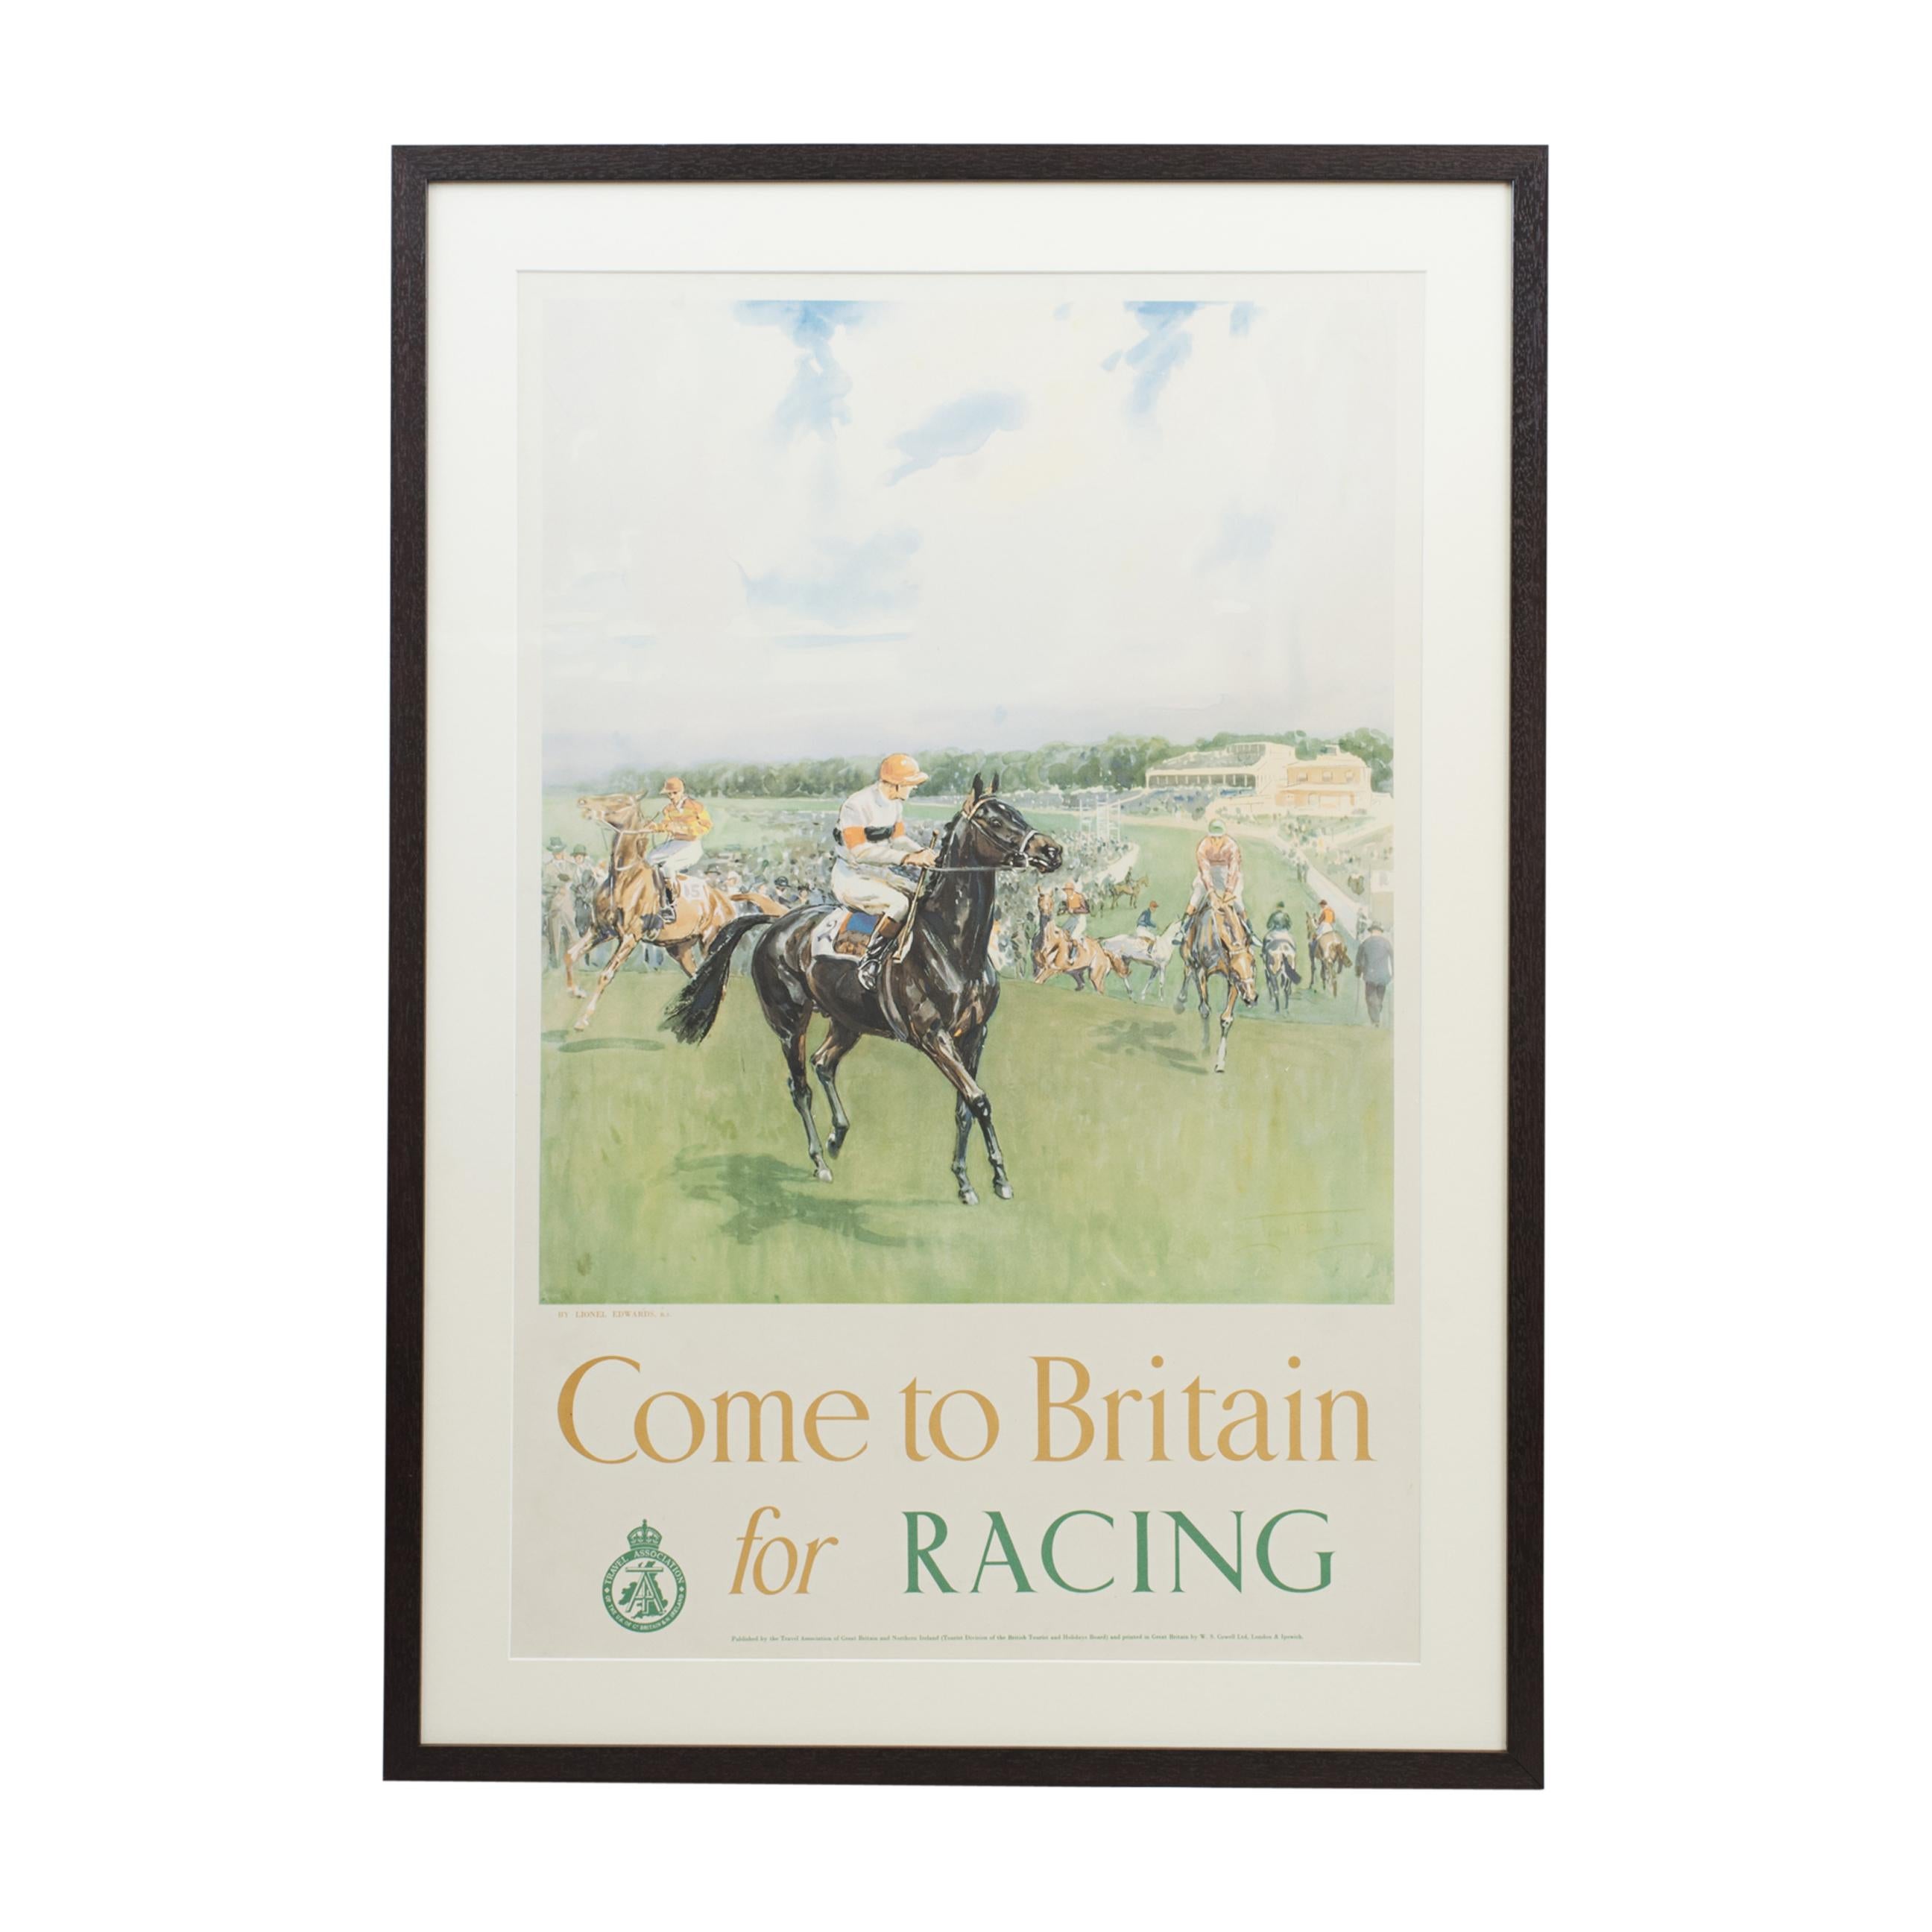 Original travel poster come to Britain for racing by Lionel Edwards.
A striking horse racing poster by Lionel Edwards entitled 'Come to Britain for Racing'. The Travel Association of Great Britain and Northern Ireland published the chromolithograph